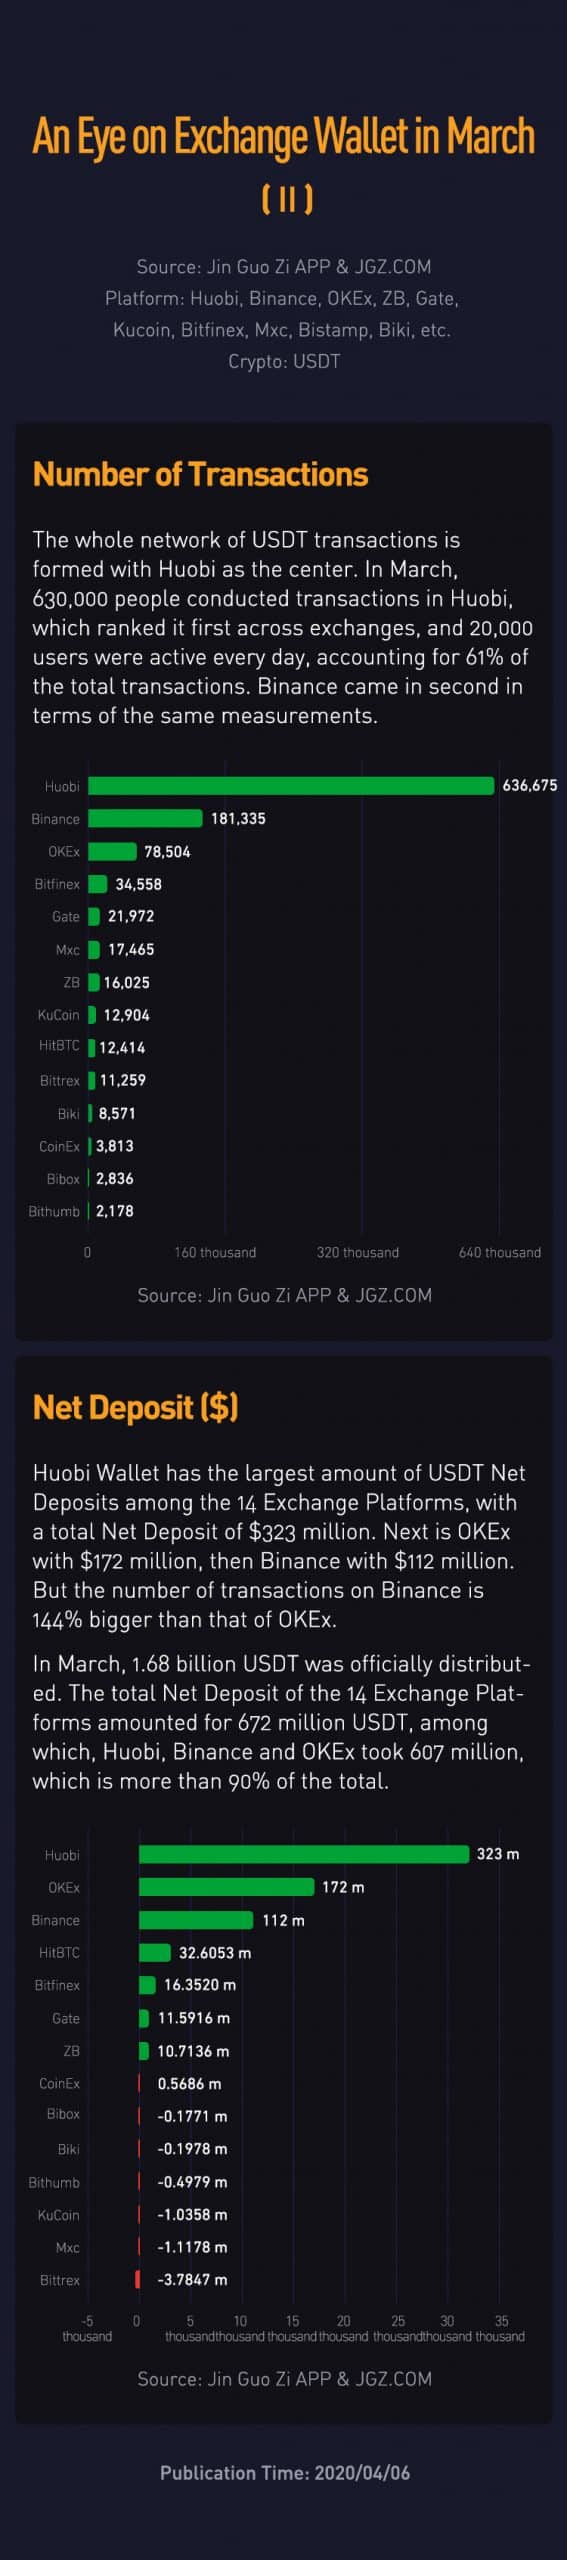 Crypto Exchange Huobi Leads With Highest Number of USDT Transactions and Net Deposits in March - 1